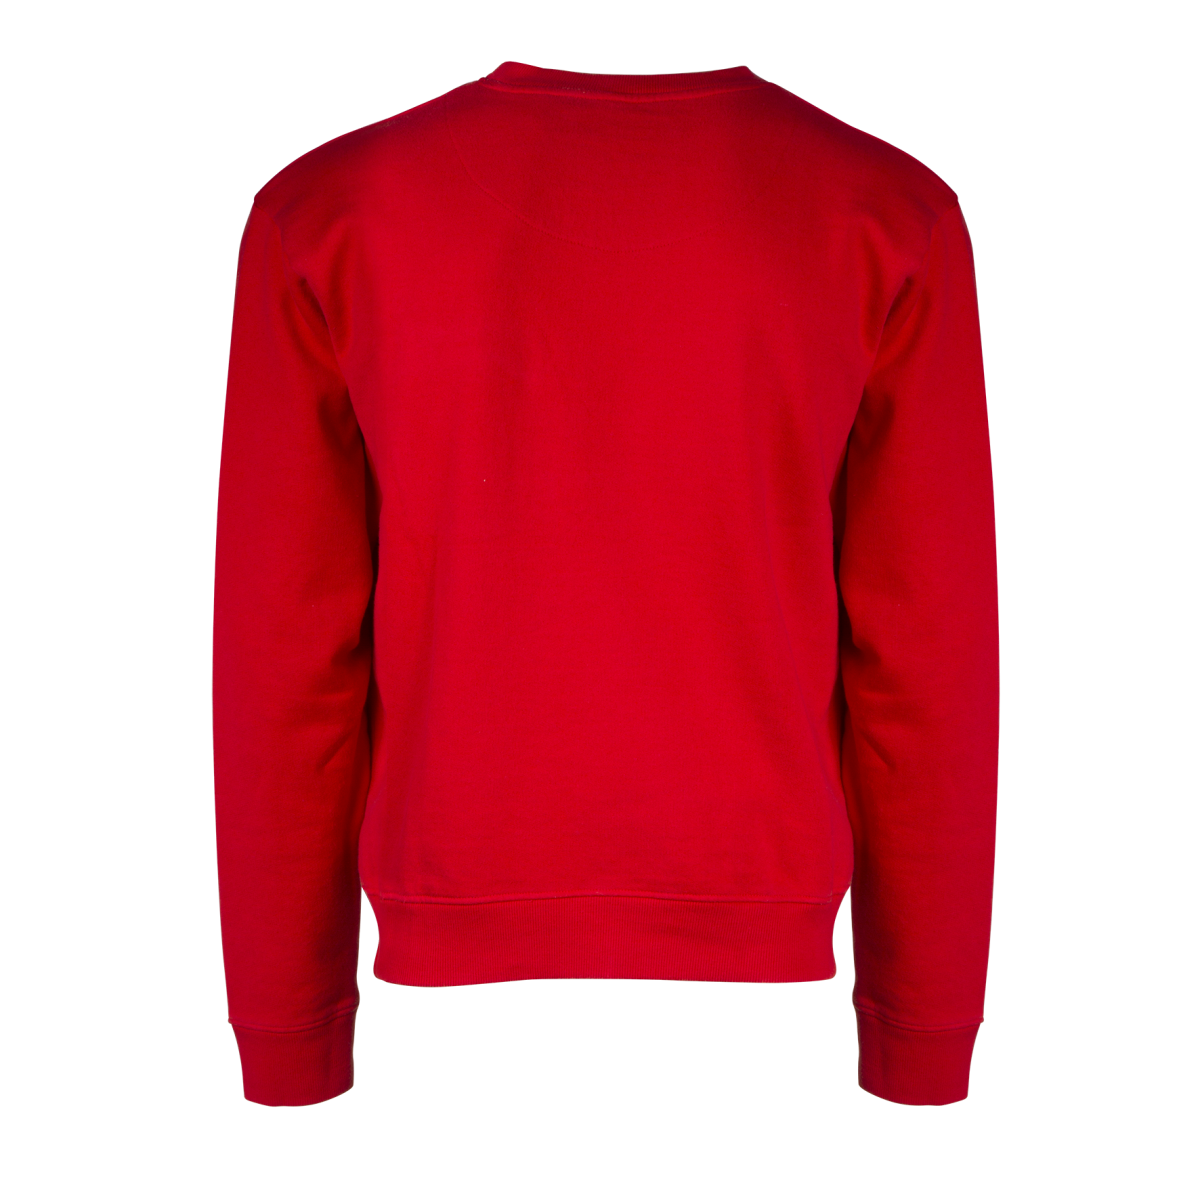 Jumper Sweater PNG Images